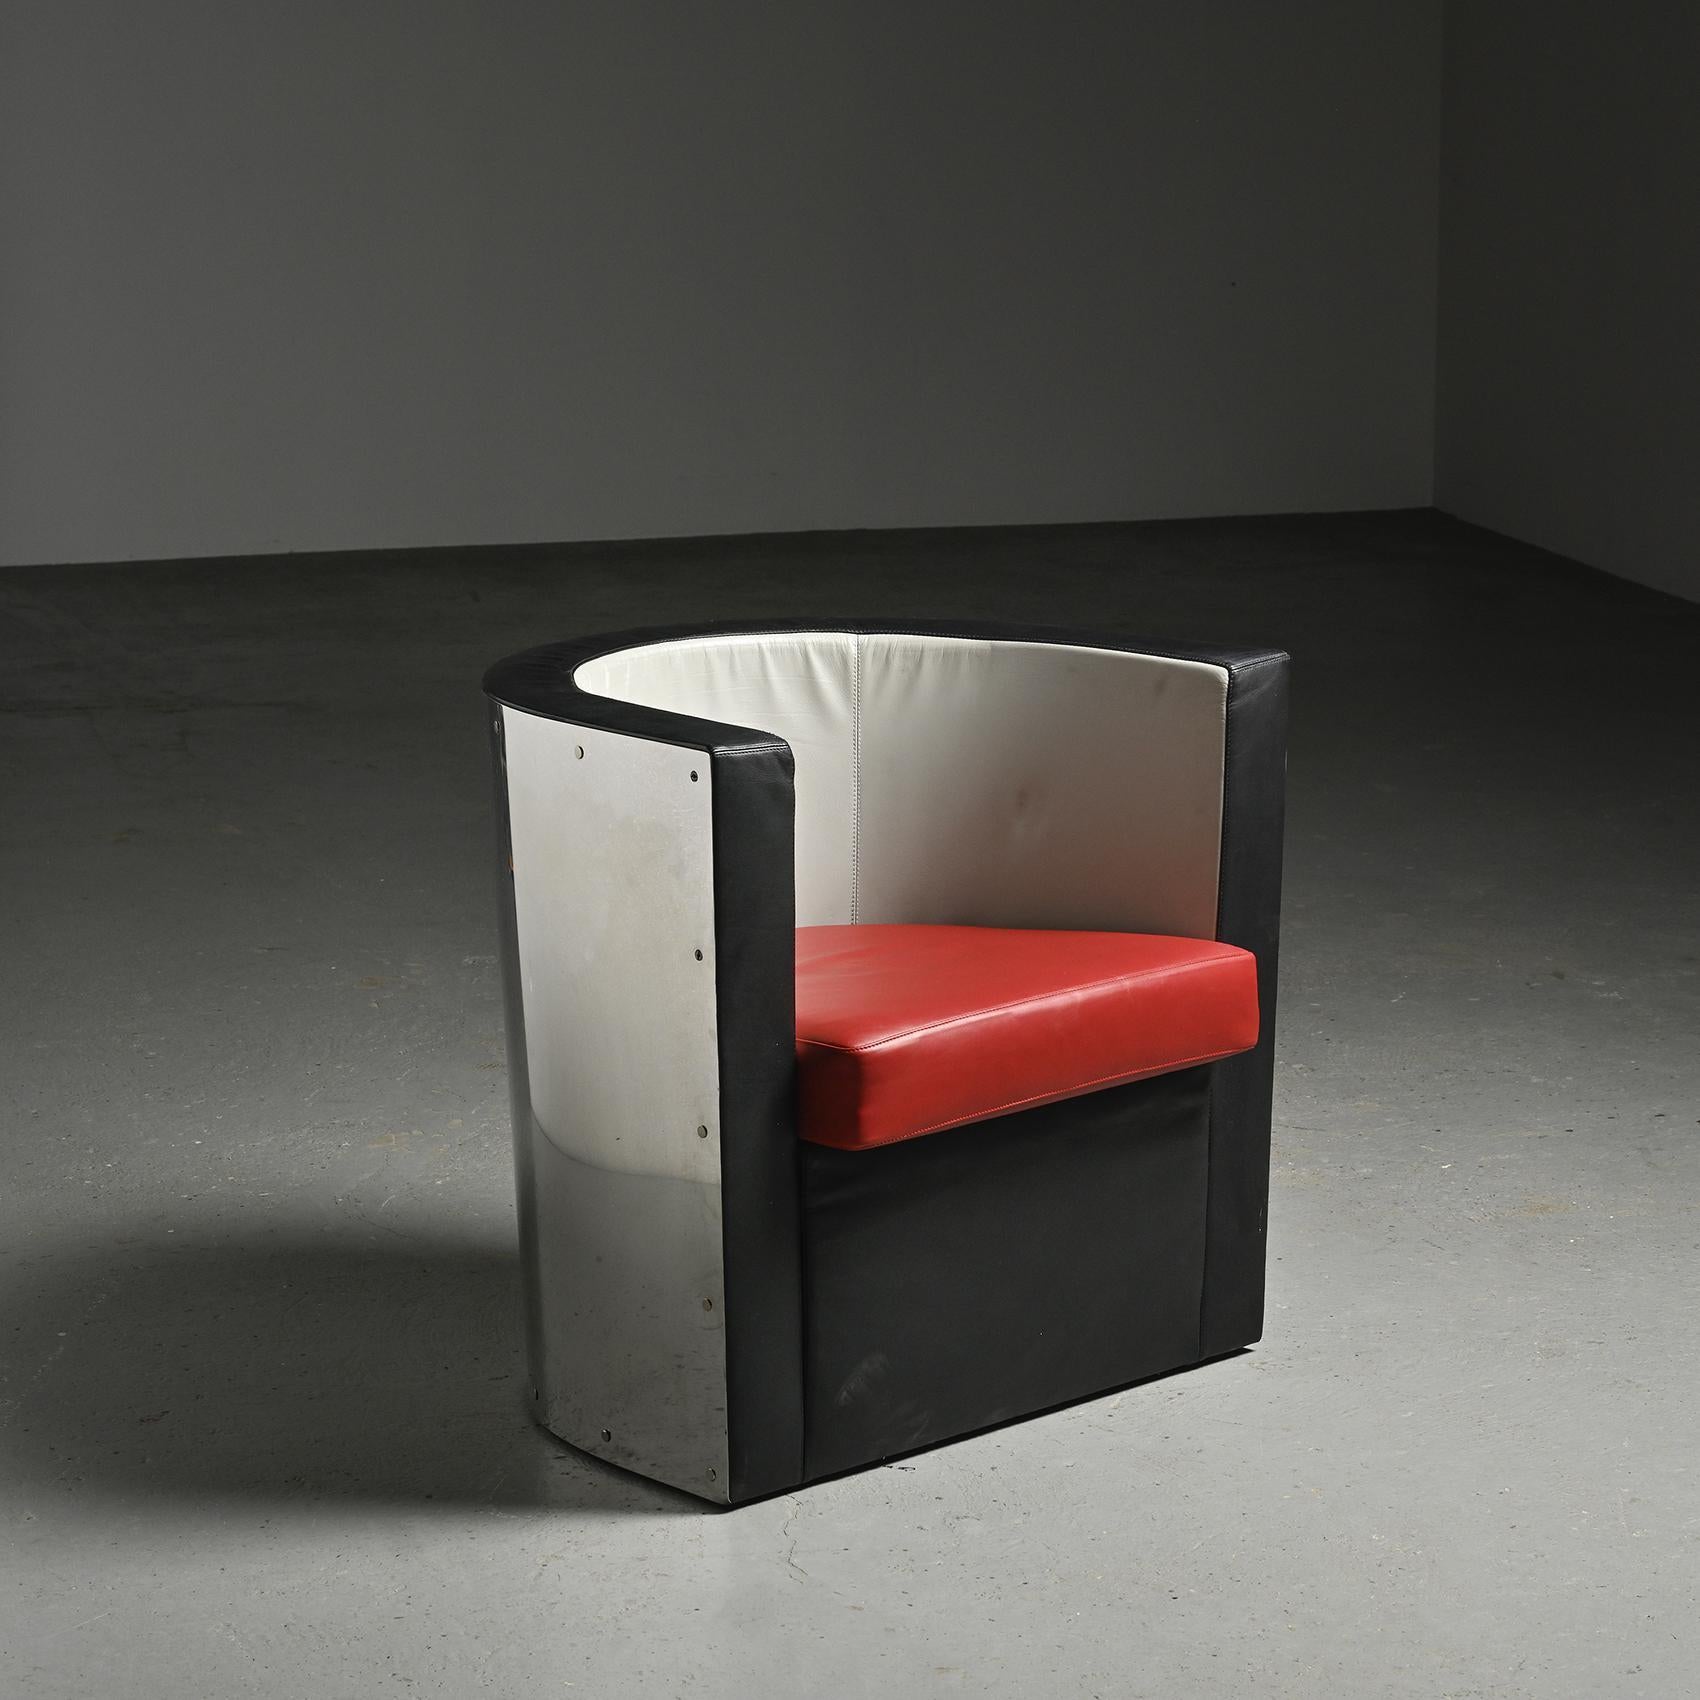 
The D62 armchair by El Lissitzky is an iconic piece of modern design. El Lissitzky, born Lazar Markovich Lissitzky, was a Russian artist, architect, and designer, a key figure in the Constructivist movement. Active in the 1920s and 1930s, Lissitzky